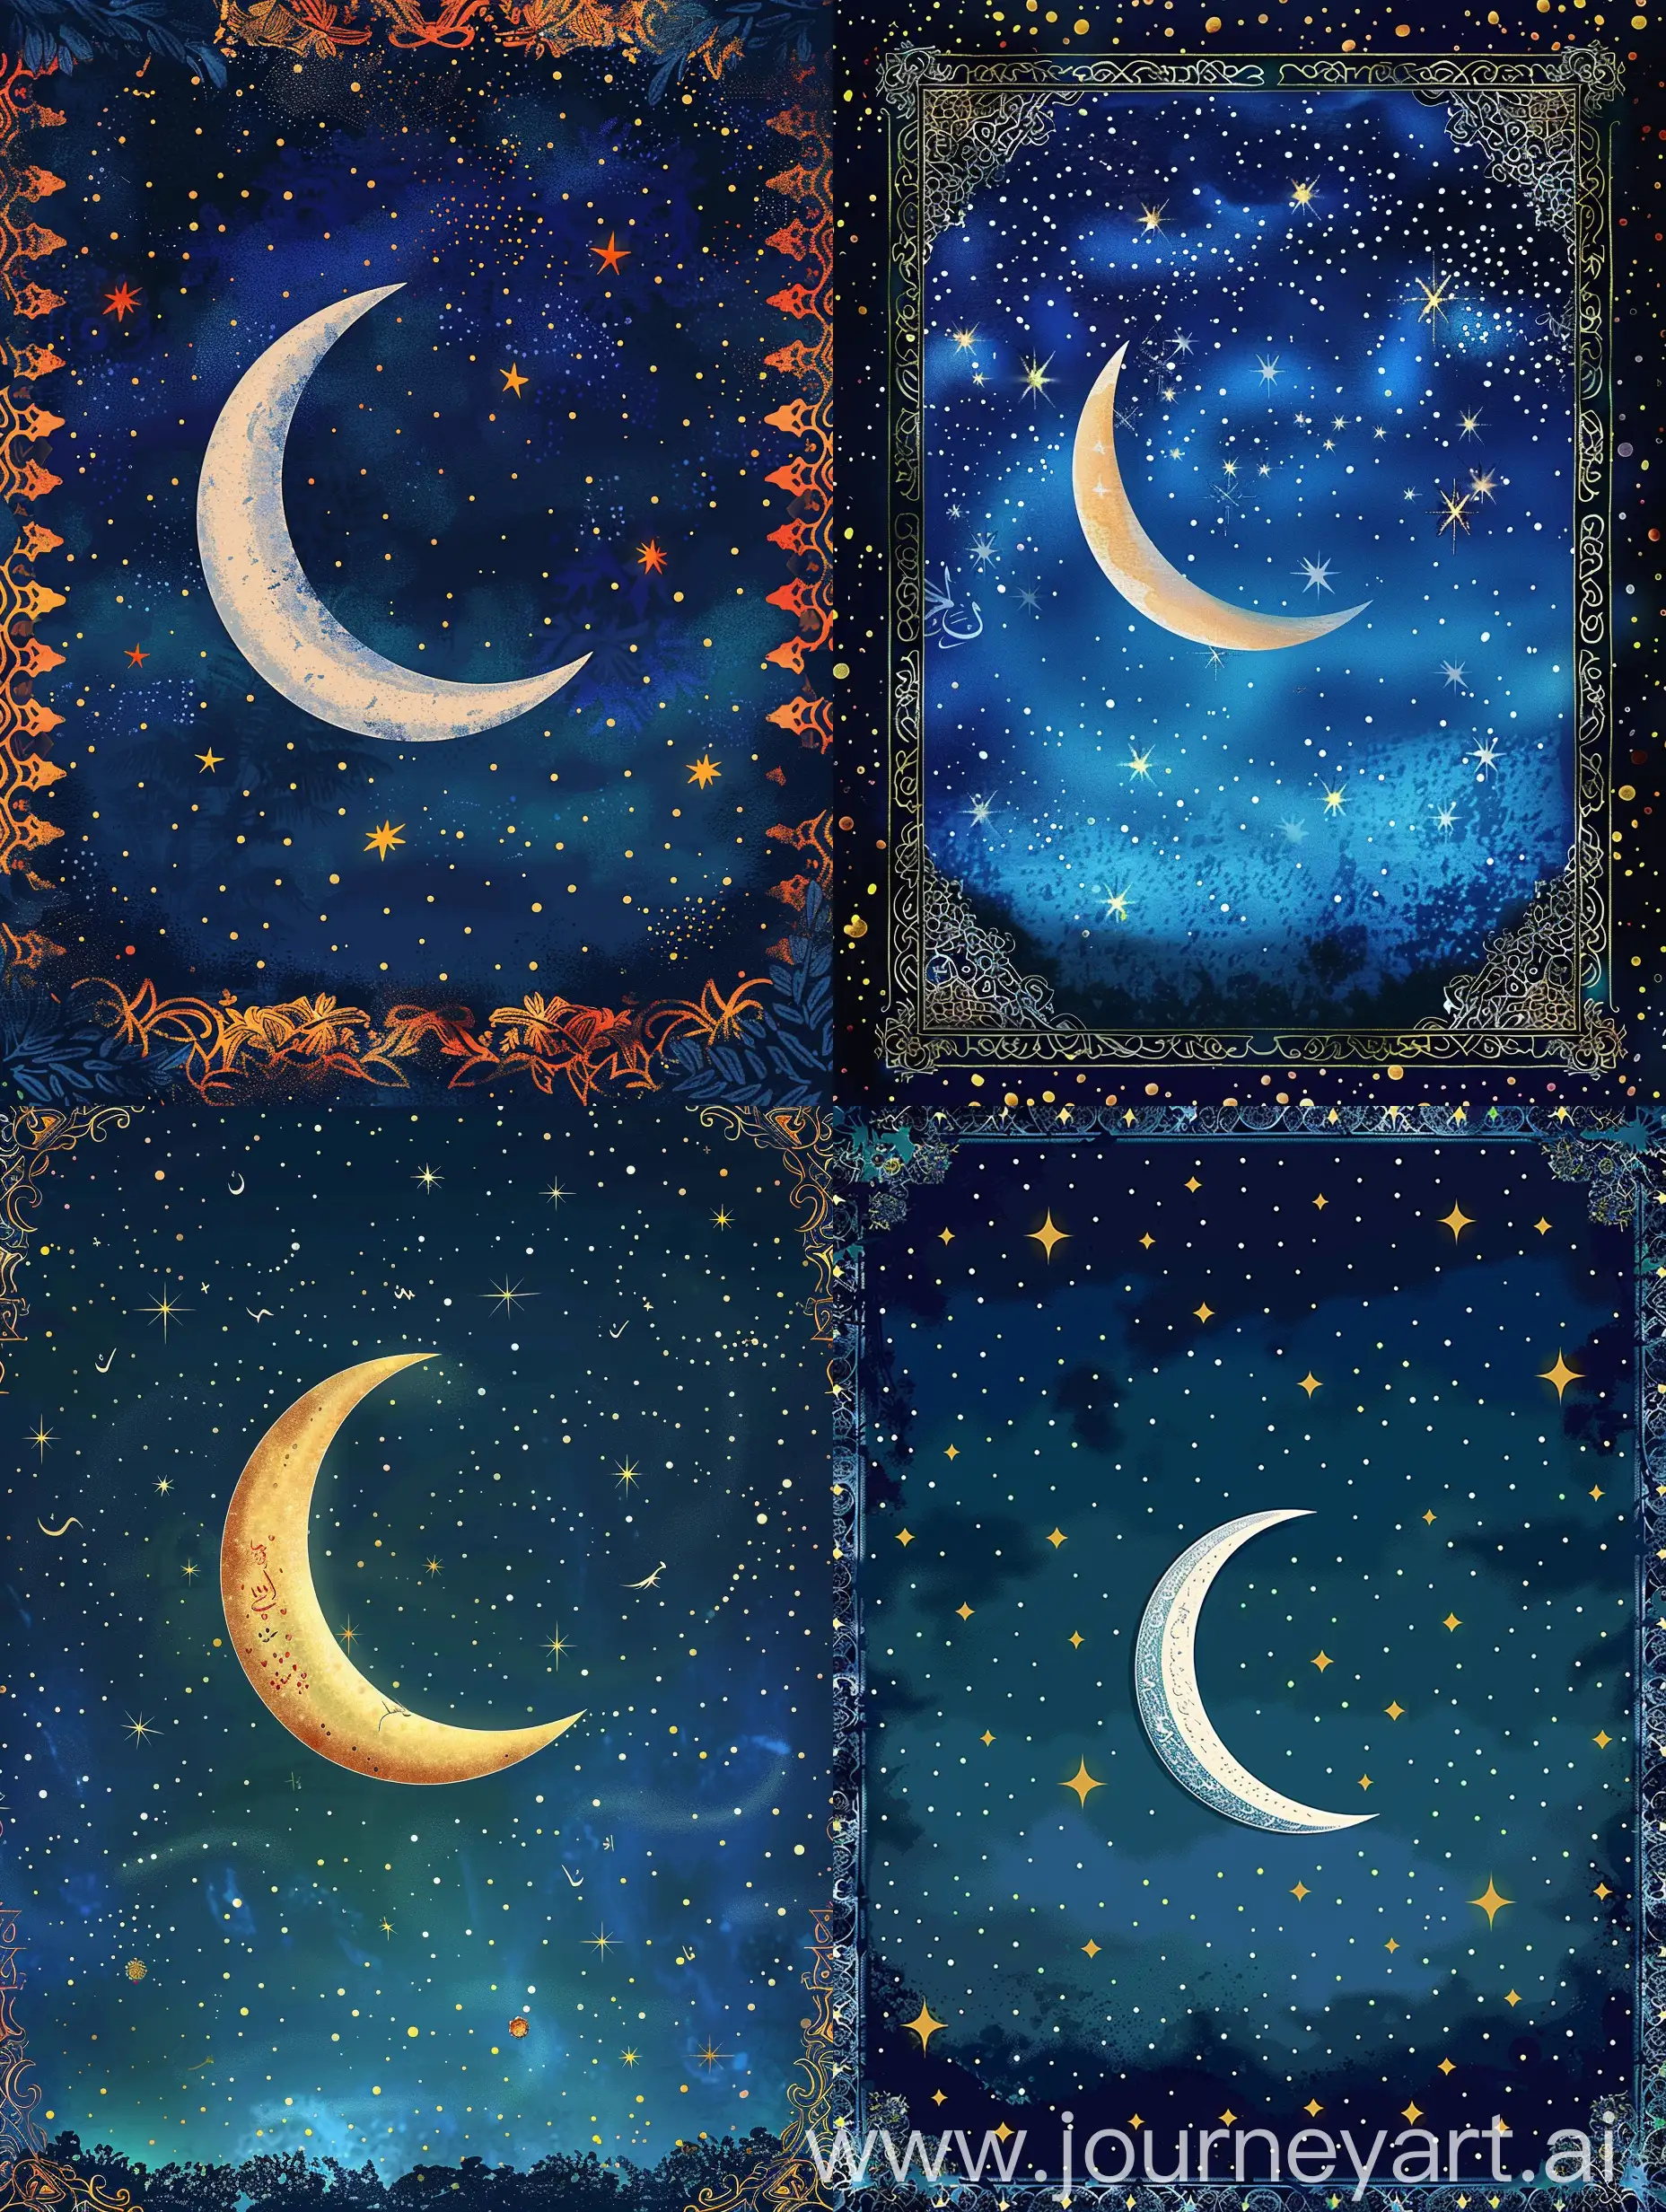 a ramadan start celebration, a crescent moon in a night sky with stars and also some islamic patterns in the sides of the picture; poster like;